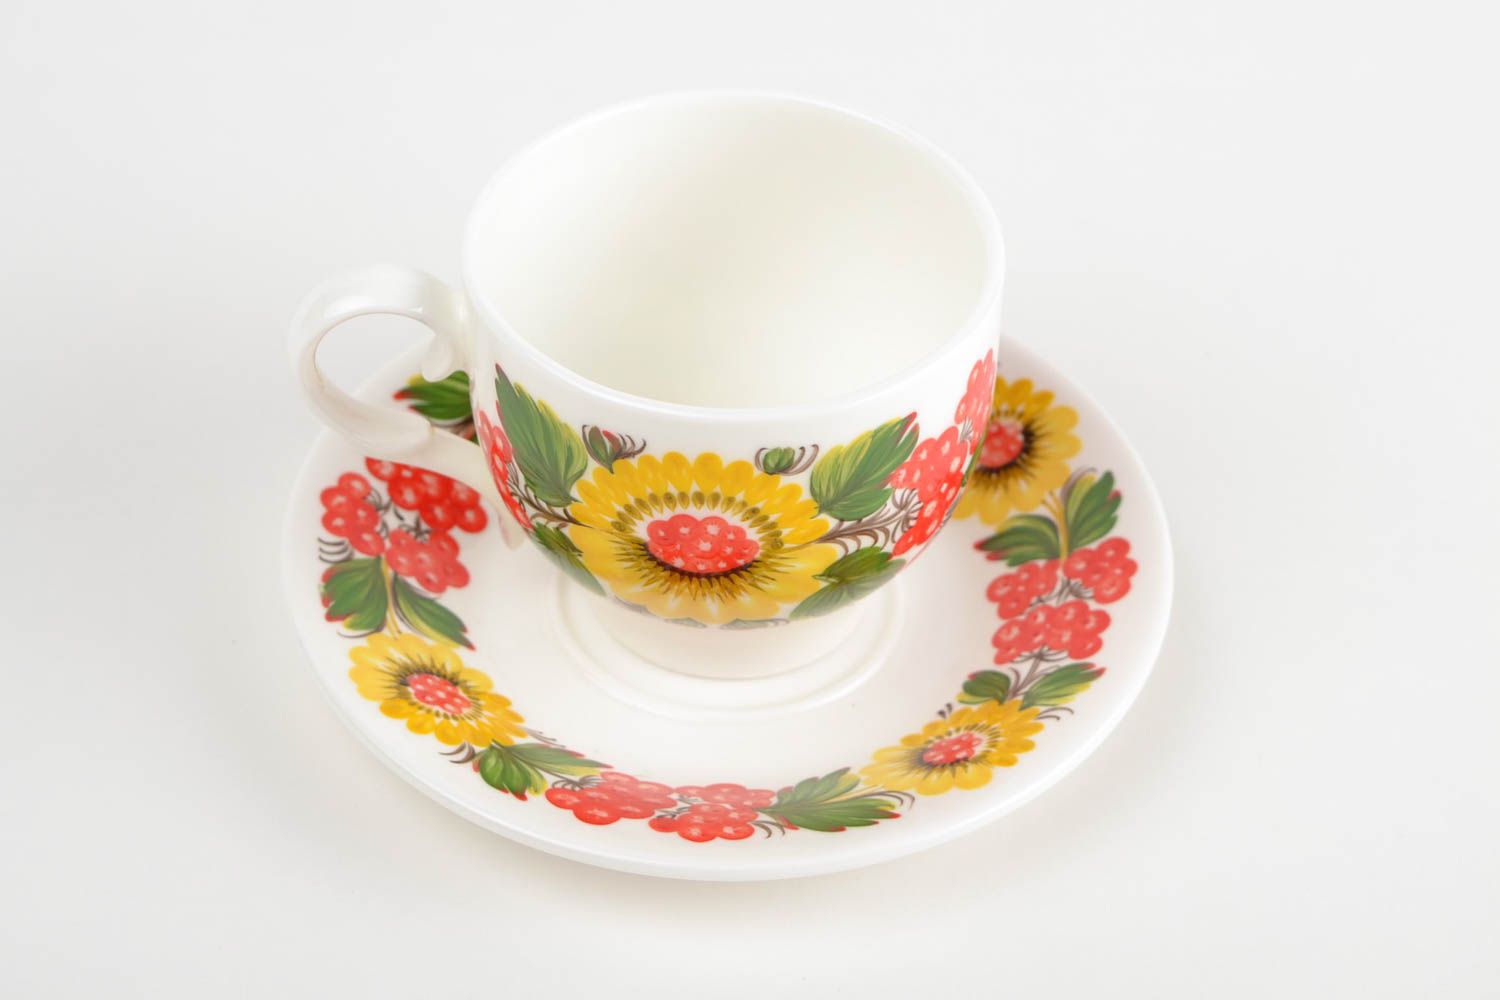 Russian style teacup in white, red, and green colors photo 5